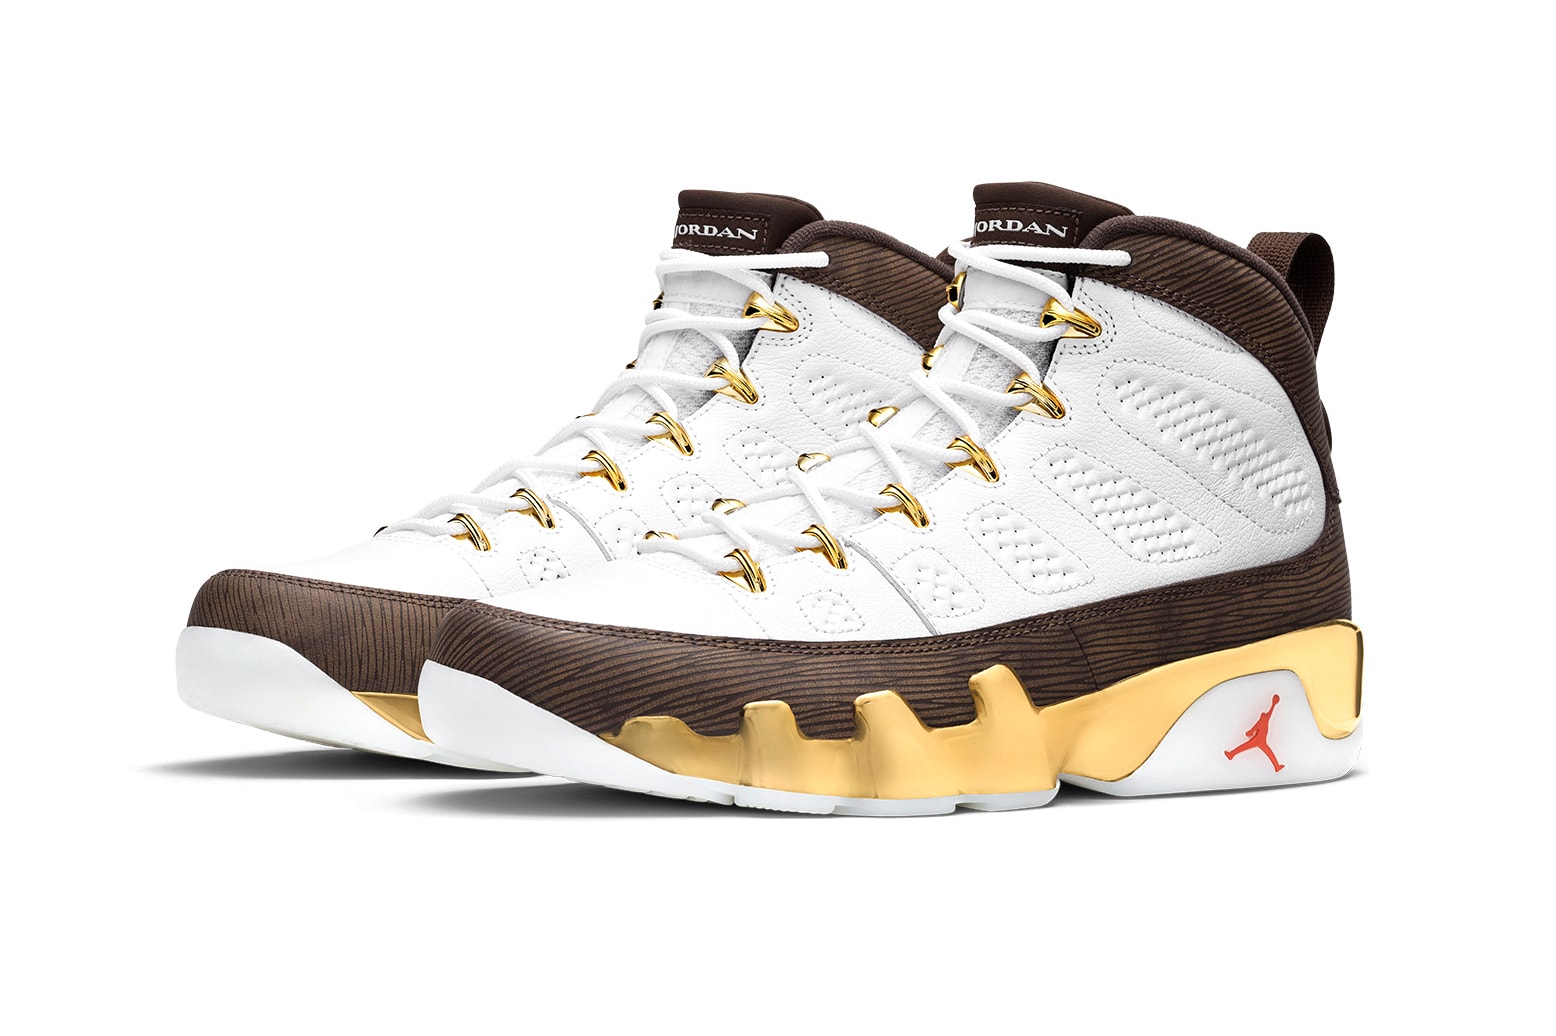 What Pros Wear: Carmelo Anthony's Jordan Melo M9 Shoes - What Pros